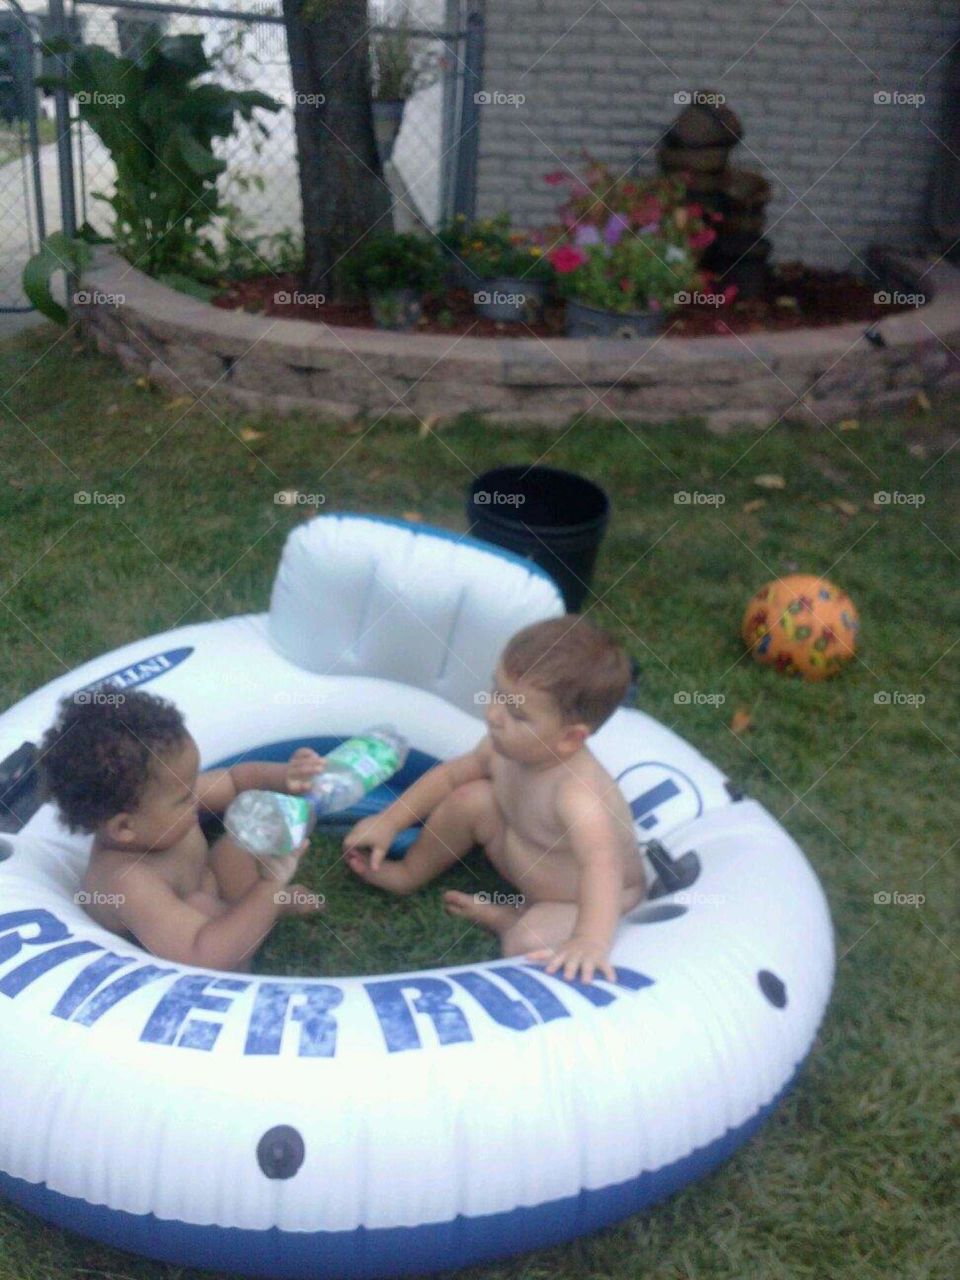 too cute. my son and nephew playing out the pool